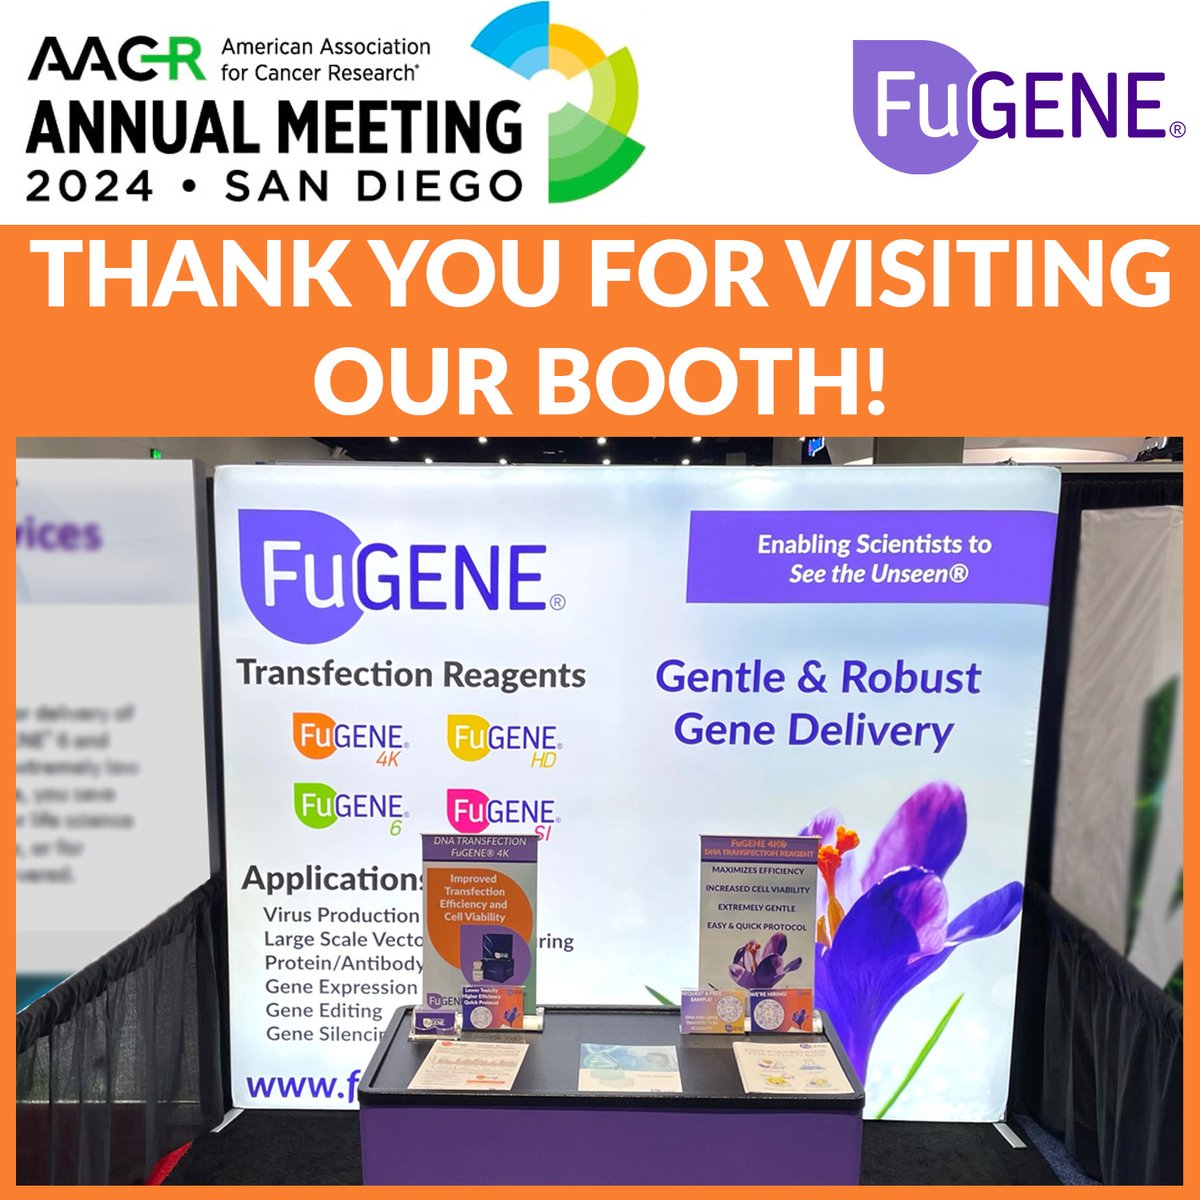 Thanks for visiting our booth at the annual AACR meeting! Sample follow ups will start this week, and we hope to see everyone in Chicago next year for #AACR25!

#FuGENE #transfection #AACR #cancerresearchsaveslives